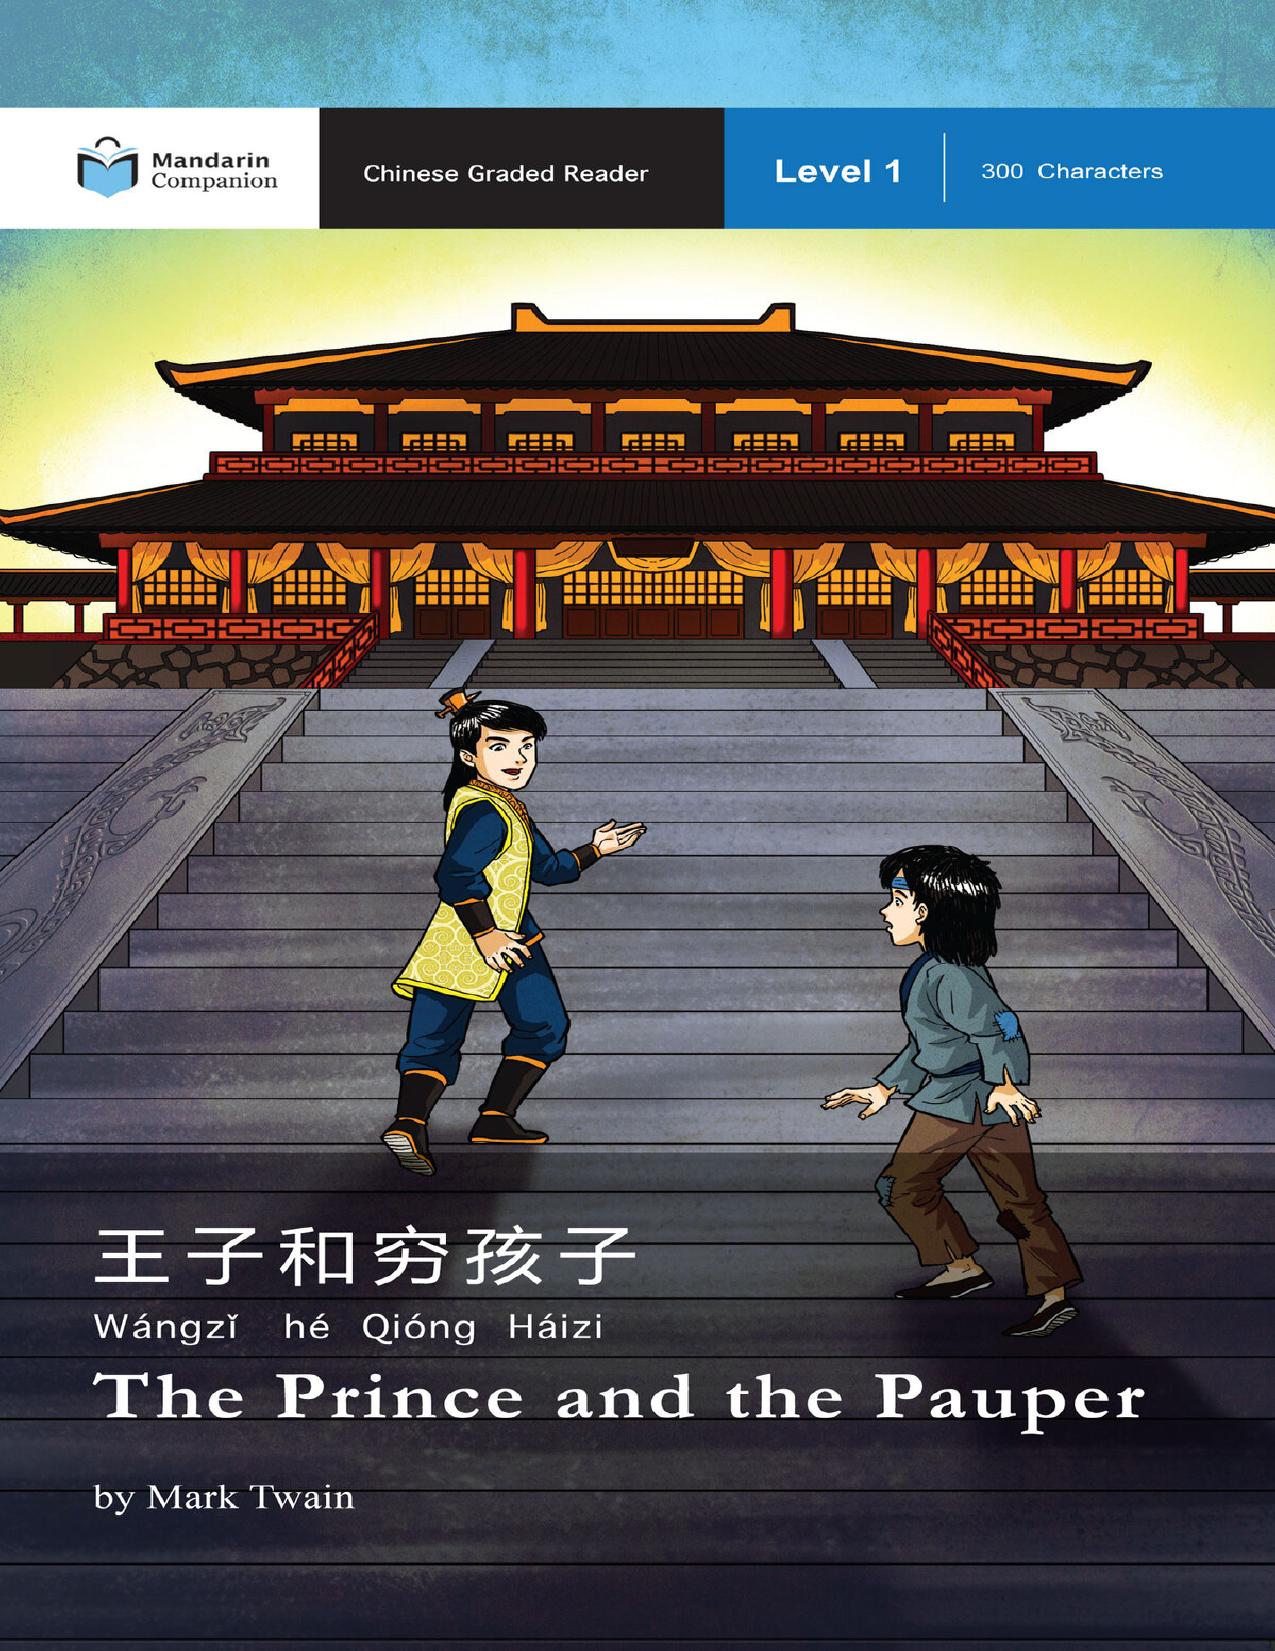 The Prince and the Pauper: Mandarin Companion Graded Readers: Level 1, Simplified Chinese Edition by Mark Twain